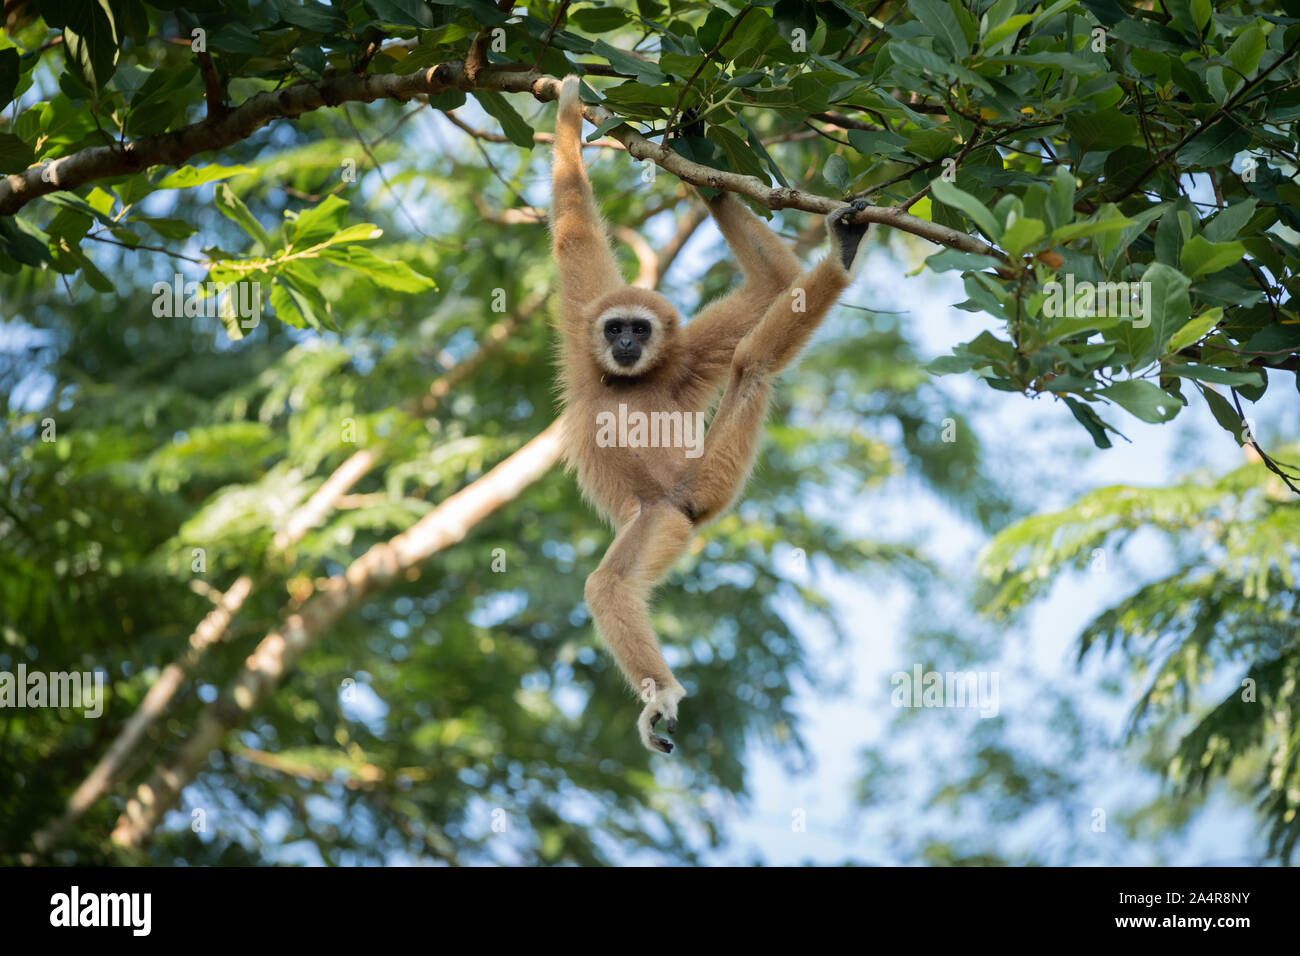 The lar gibbon (Hylobates lar), also known as the white-handed gibbon, is an endangered primate in the gibbon family, Hylobatidae. Stock Photo